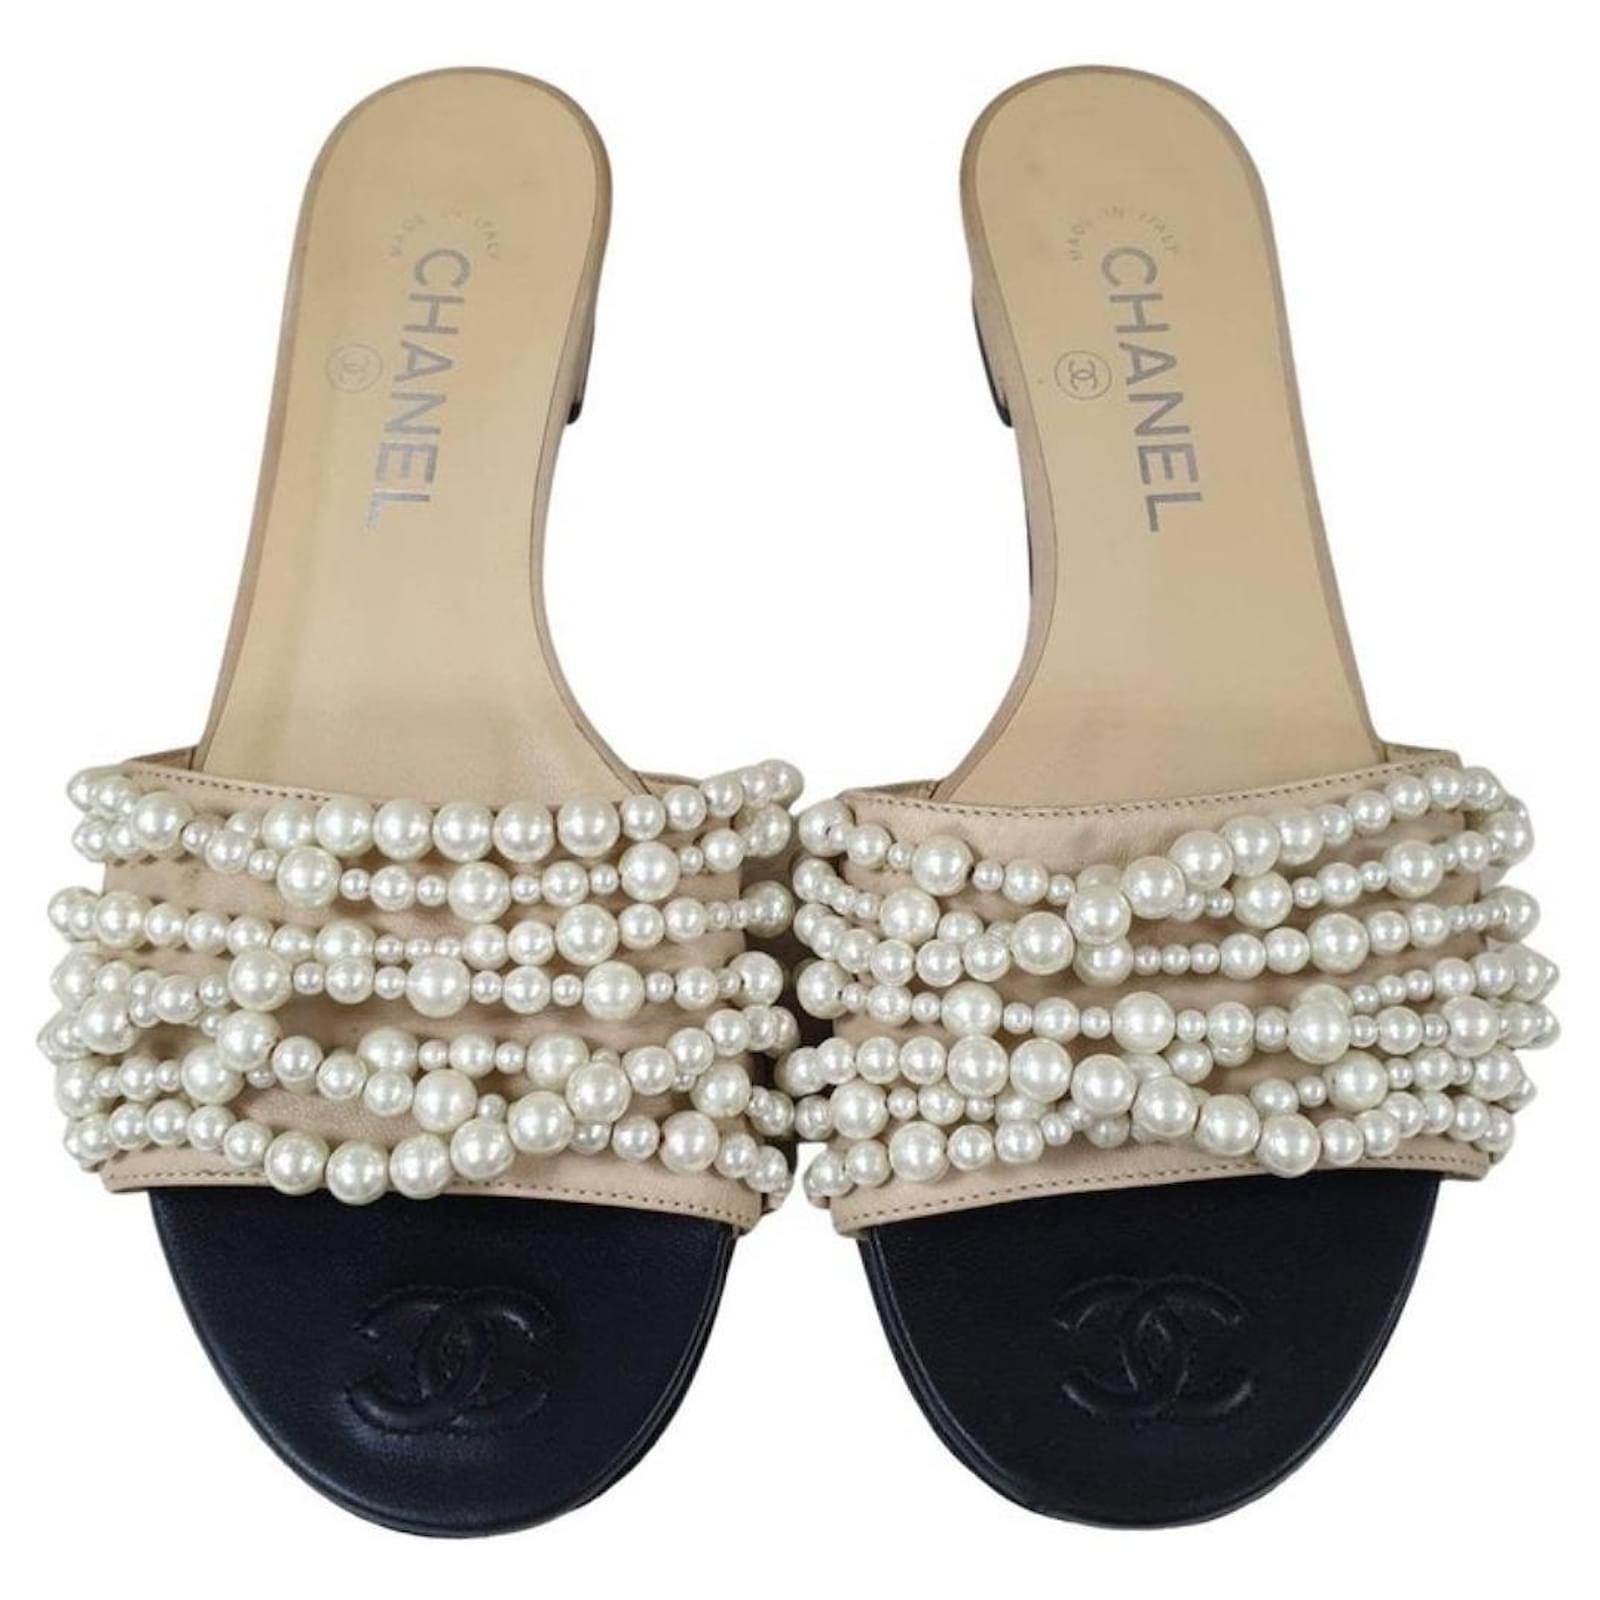 Chanel beige leather detailed with pearls sandals